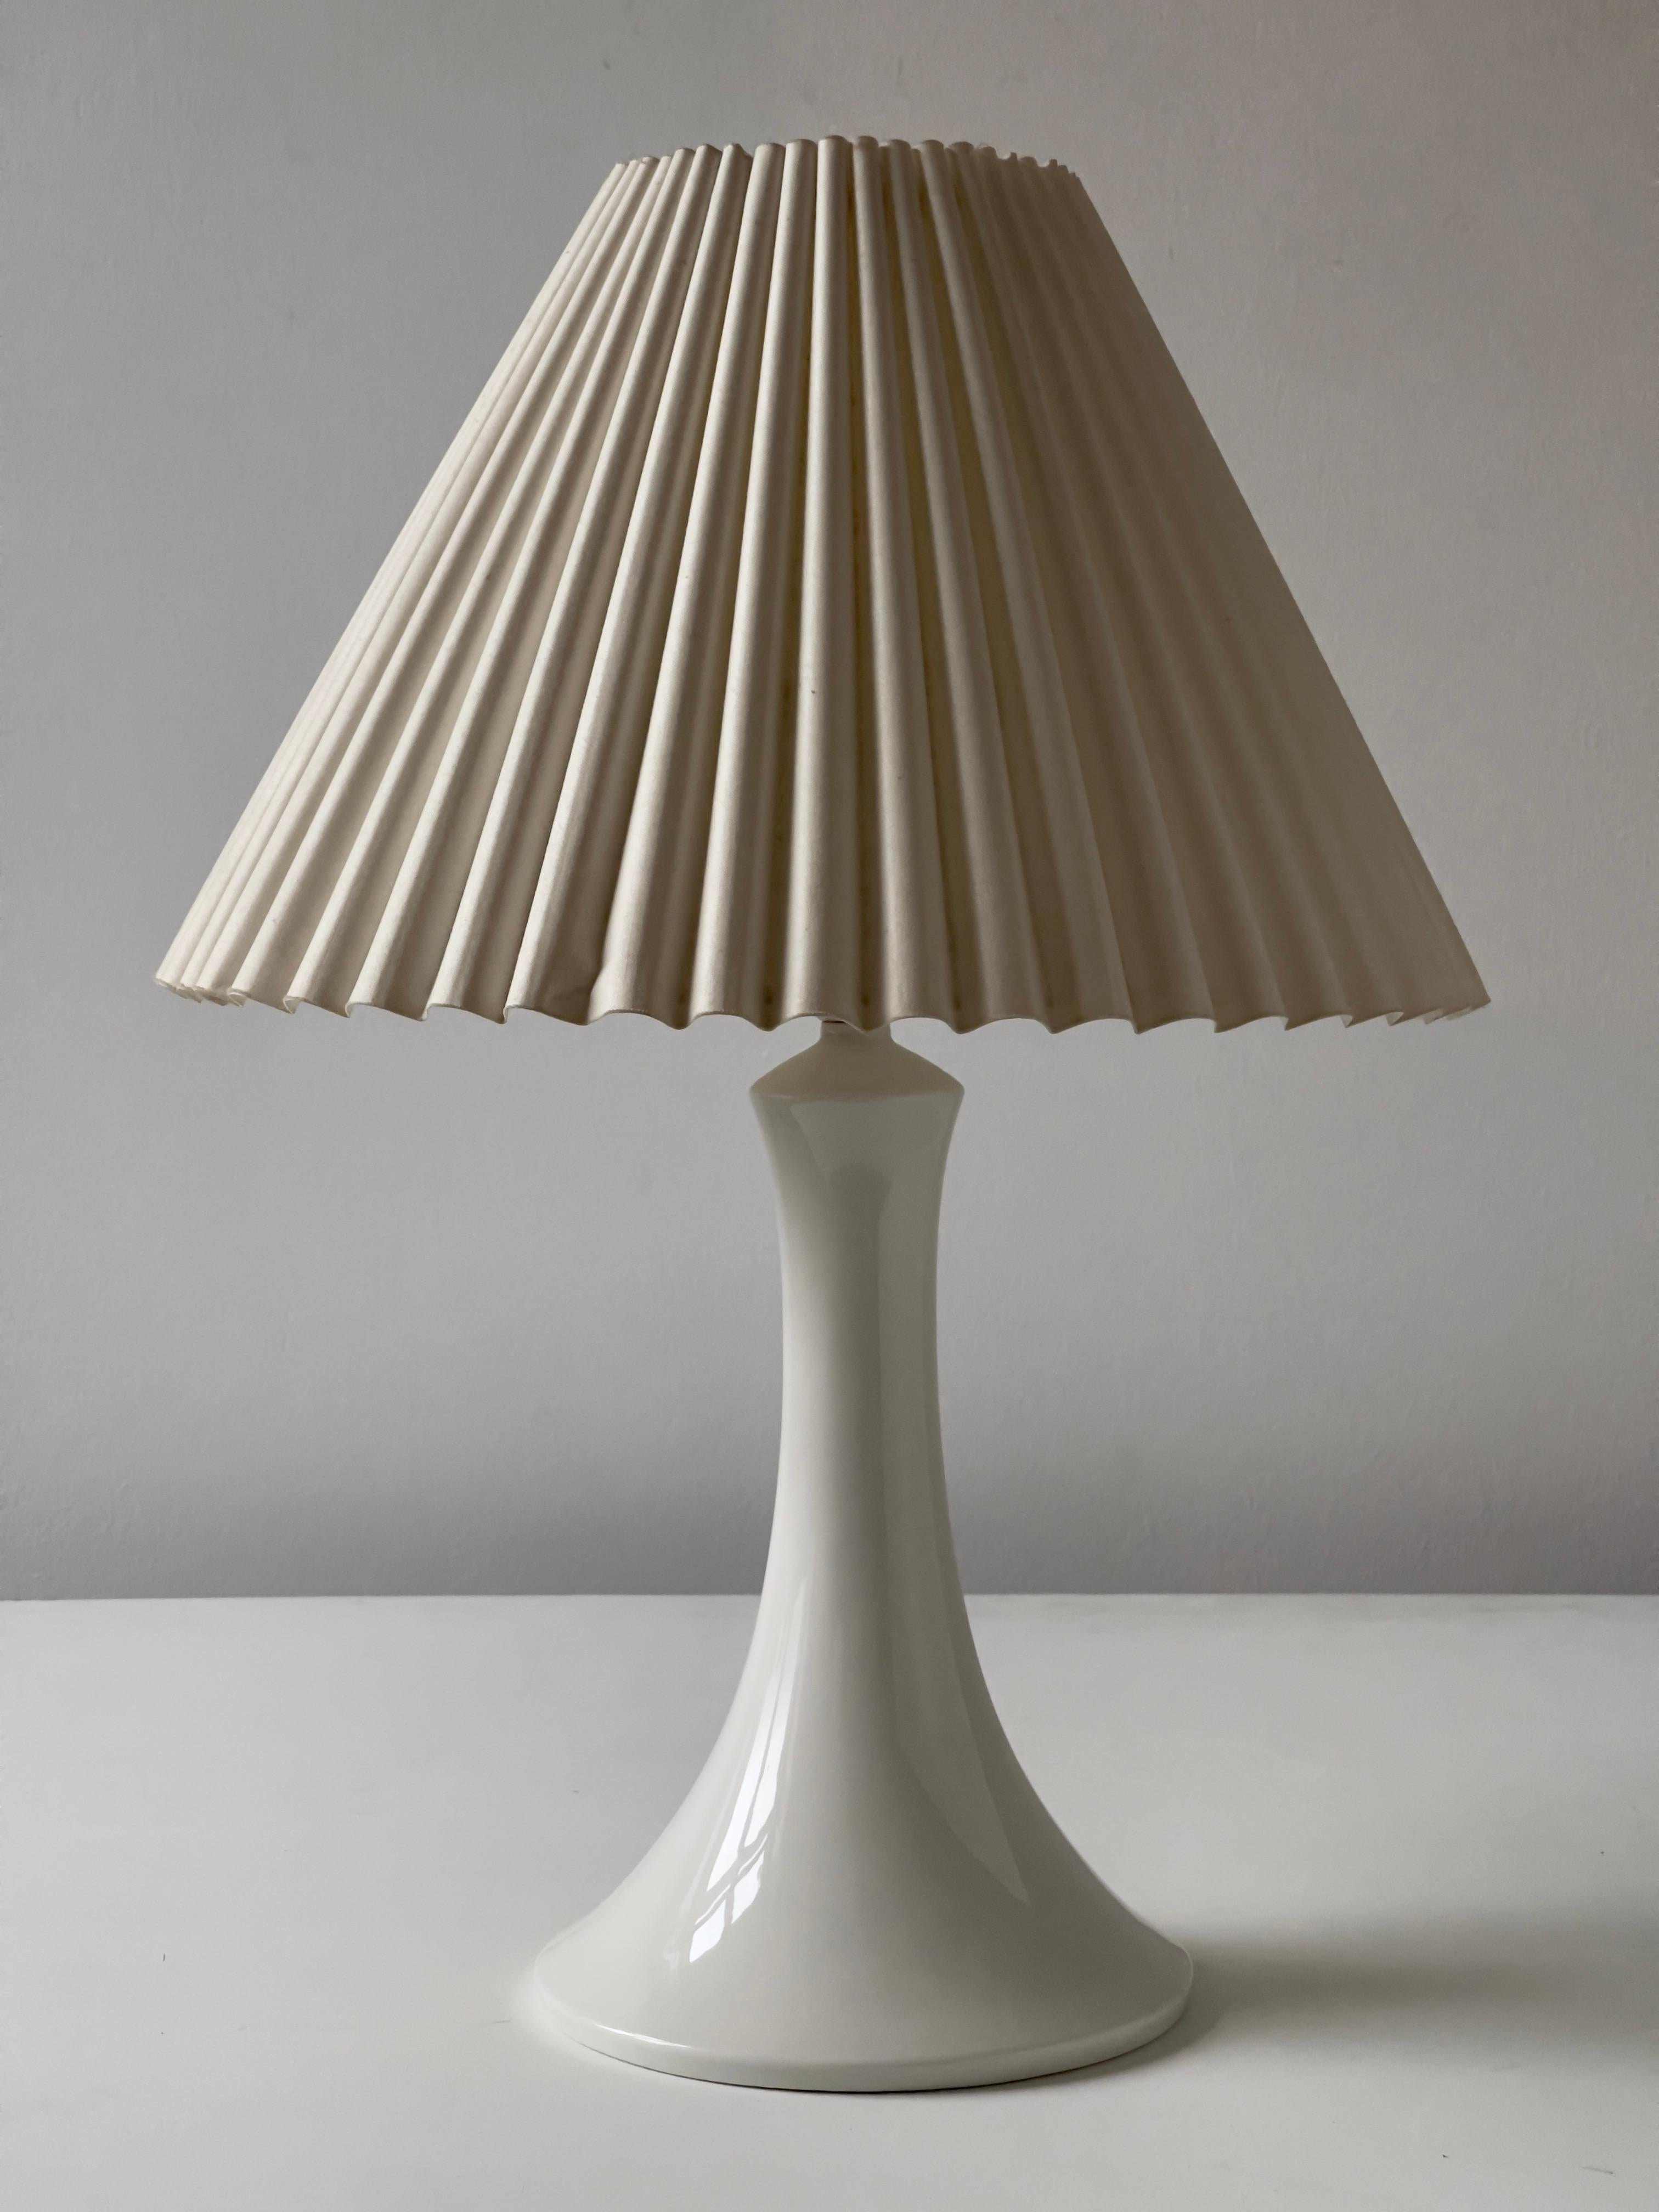 Produced by Royal Copenhagen 1960s. Beautiful condition and elegant white surface. Stamped. Height is from bottom to socket. Sold without lampshade.